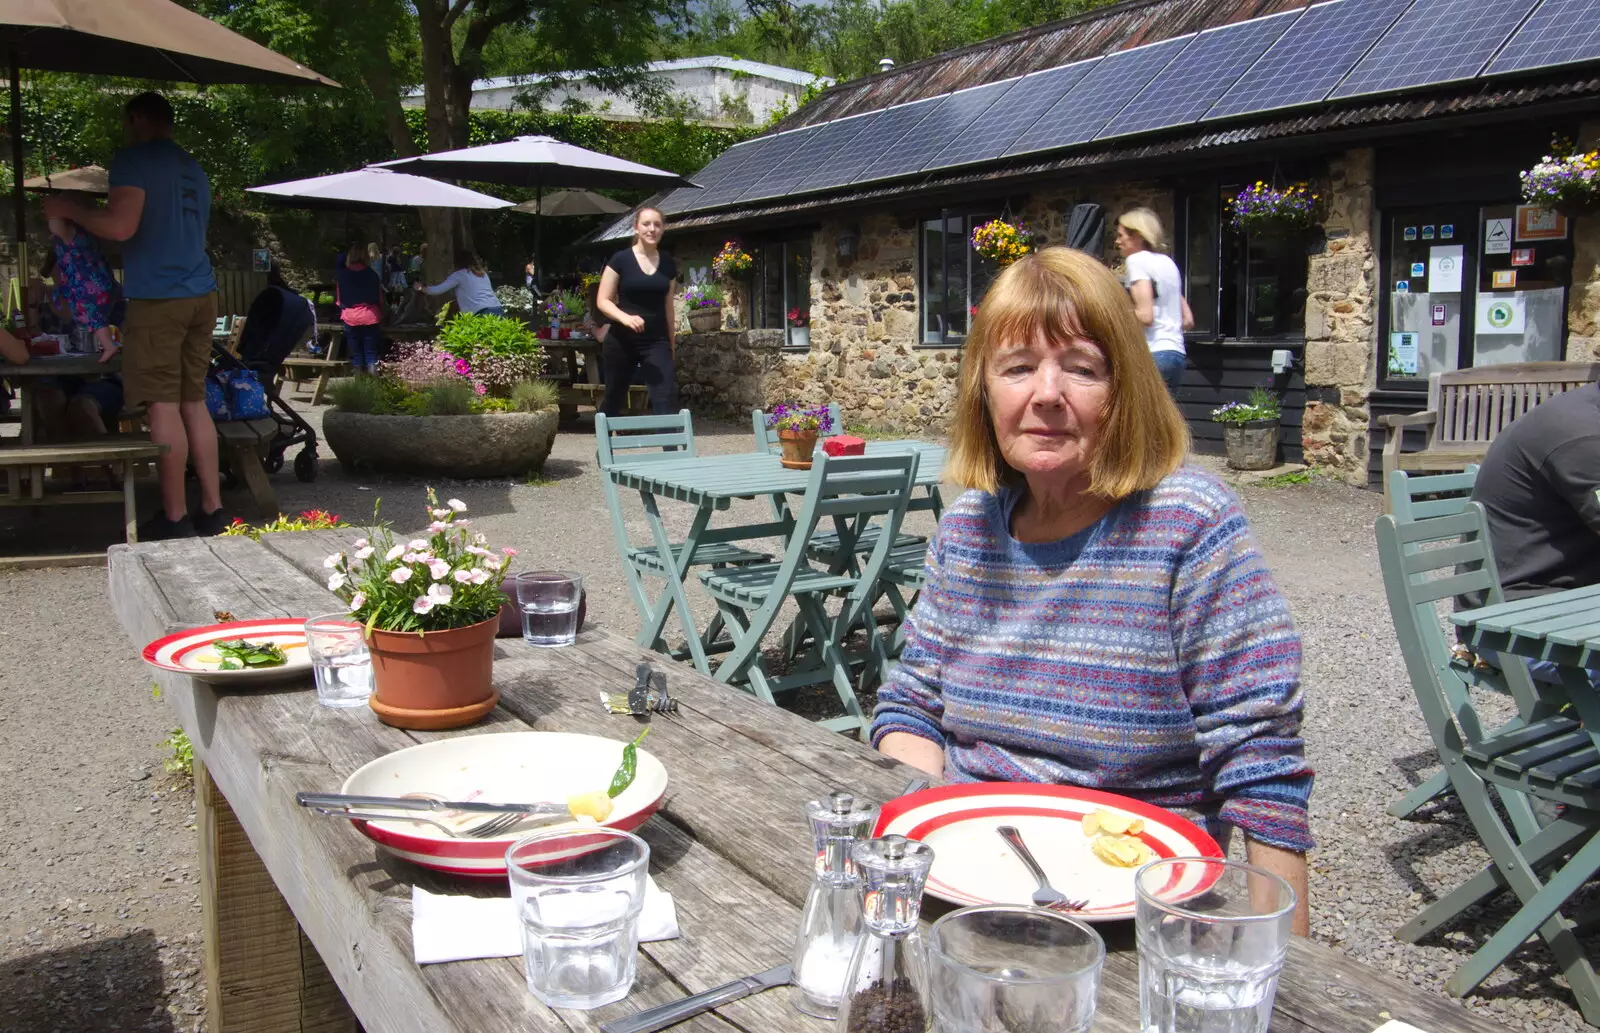 Grandma J, from Chagford Lido and a Trip to Parke, Bovey Tracey, Devon - 25th May 2019